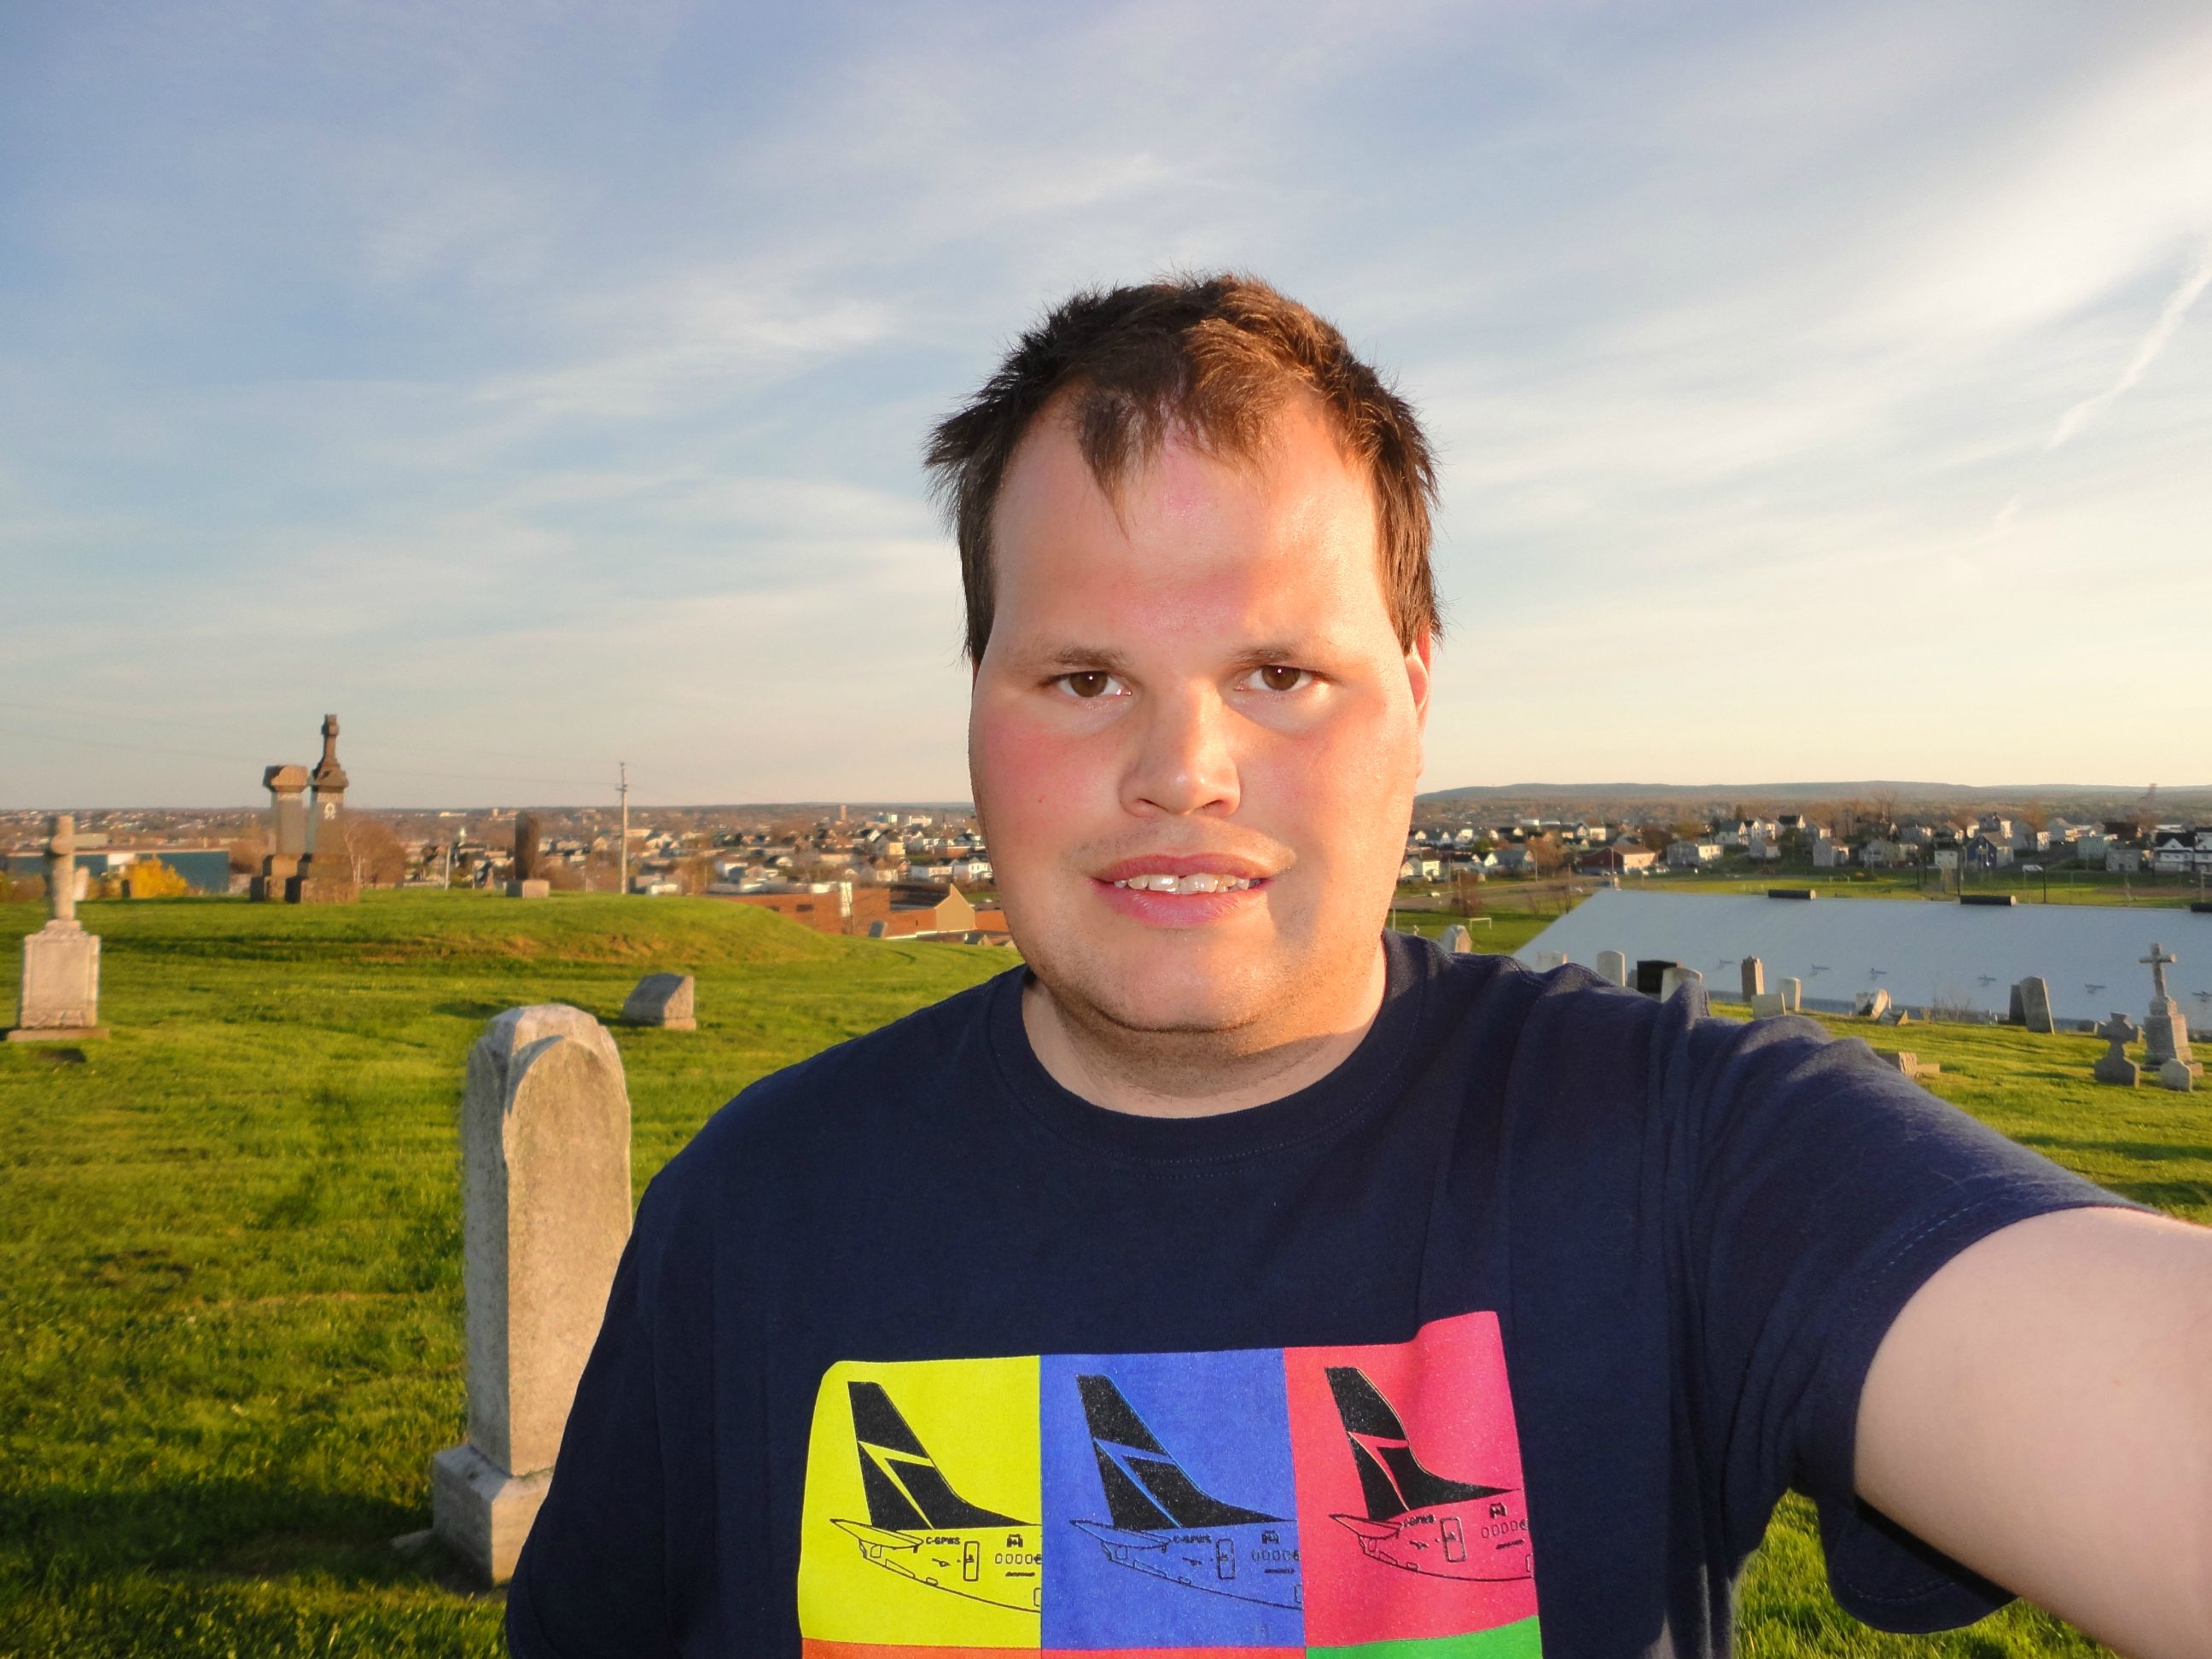 Here is Frankie MacDonald enjoying the Nice and Warm Evening down in Whitney Pier Area.